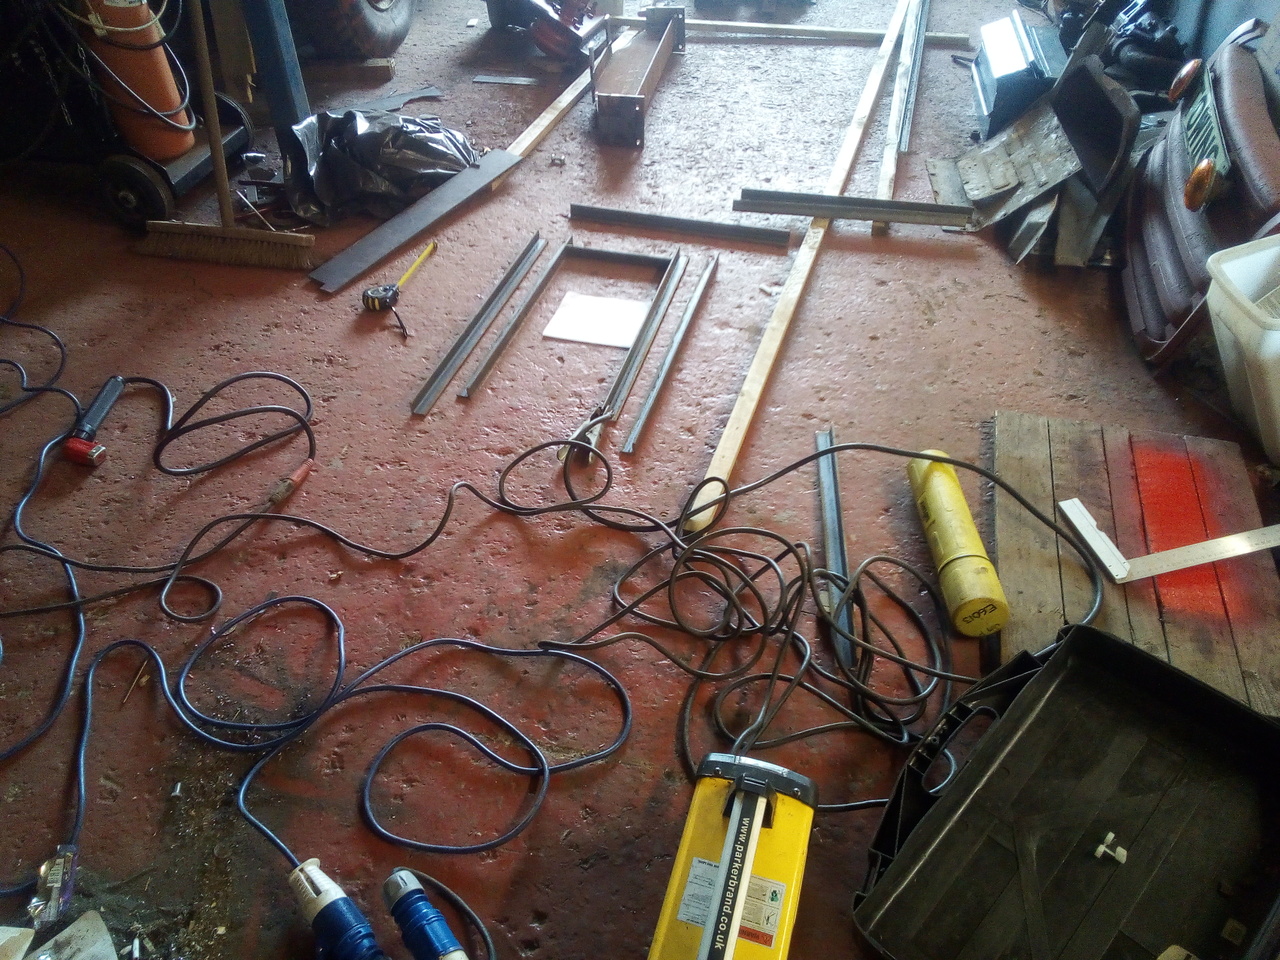 A framework taking shape in a very cluttered workshop, amid a
tangle of extension leads and welding cables.